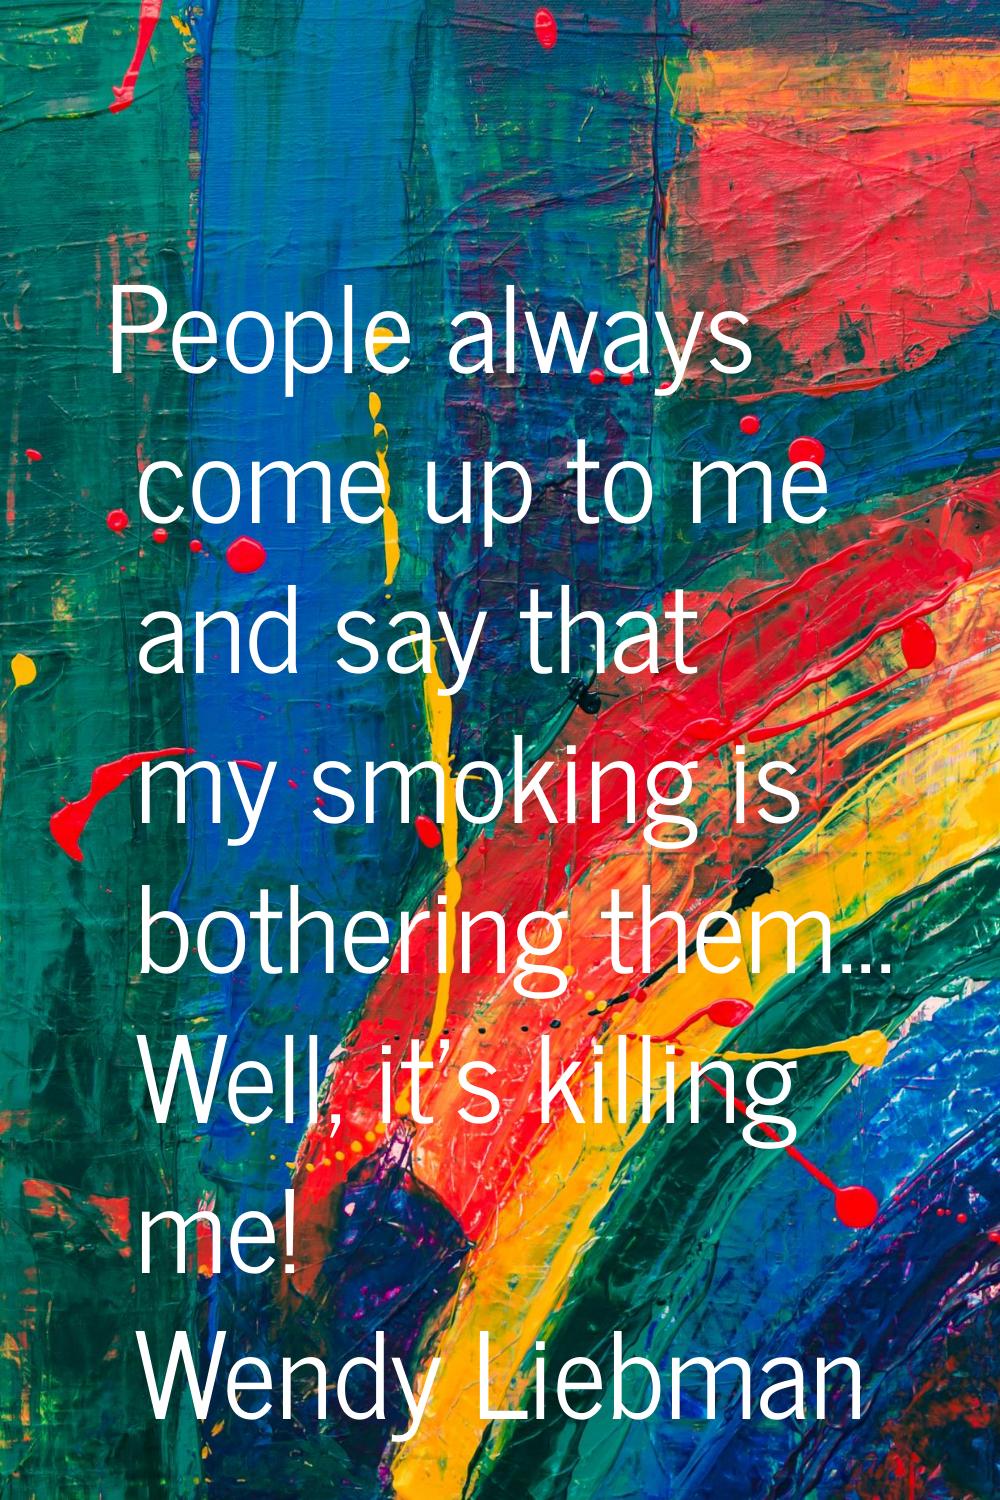 People always come up to me and say that my smoking is bothering them... Well, it's killing me!